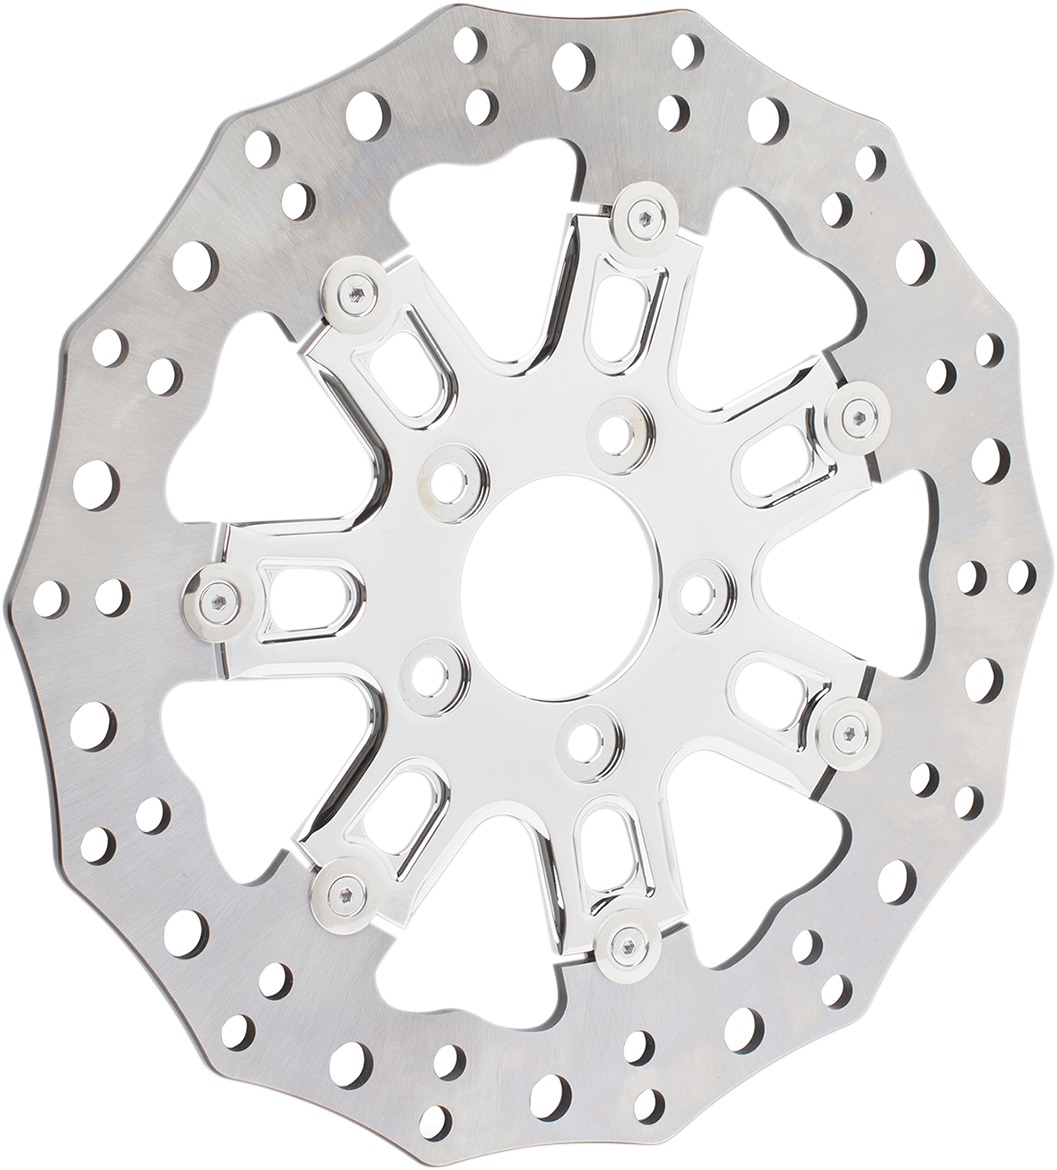 7-Valve Contour Floating Front Brake Rotor 300mm - For Harley - Click Image to Close